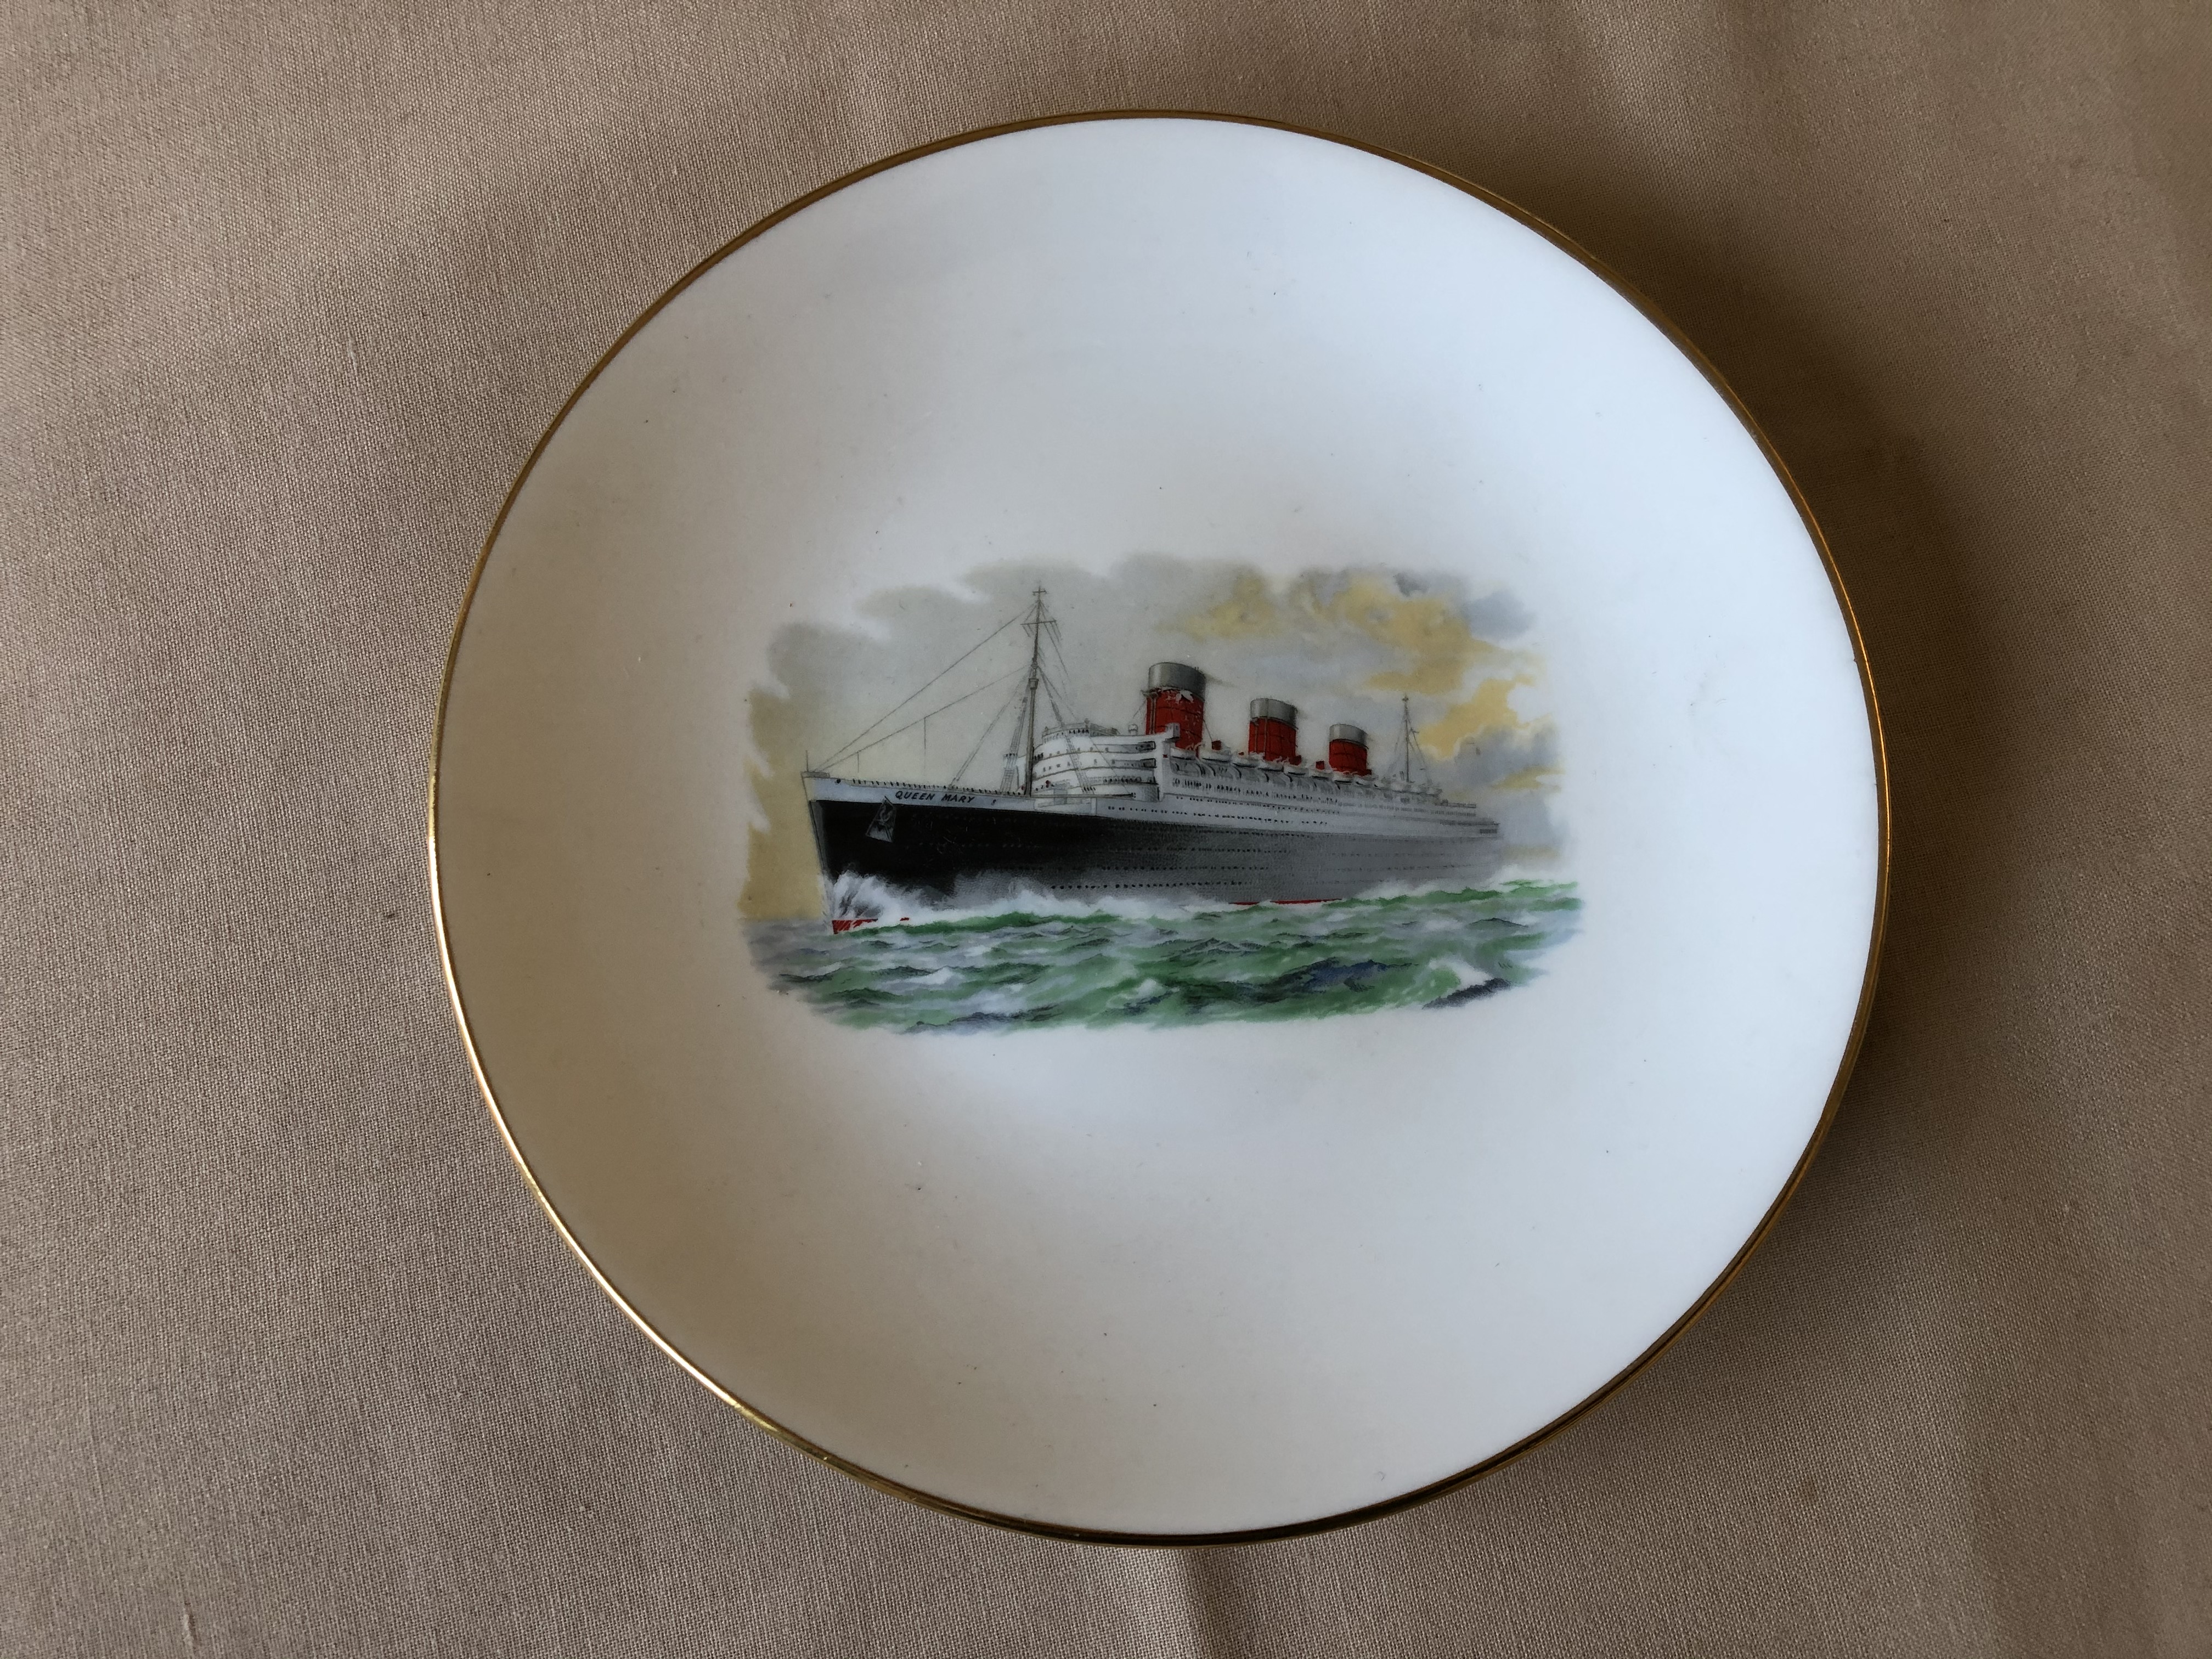 EARLY SOUVENIR PICTURE PLATE OF THE FAMOUS VESSEL THE QUEEN MARY